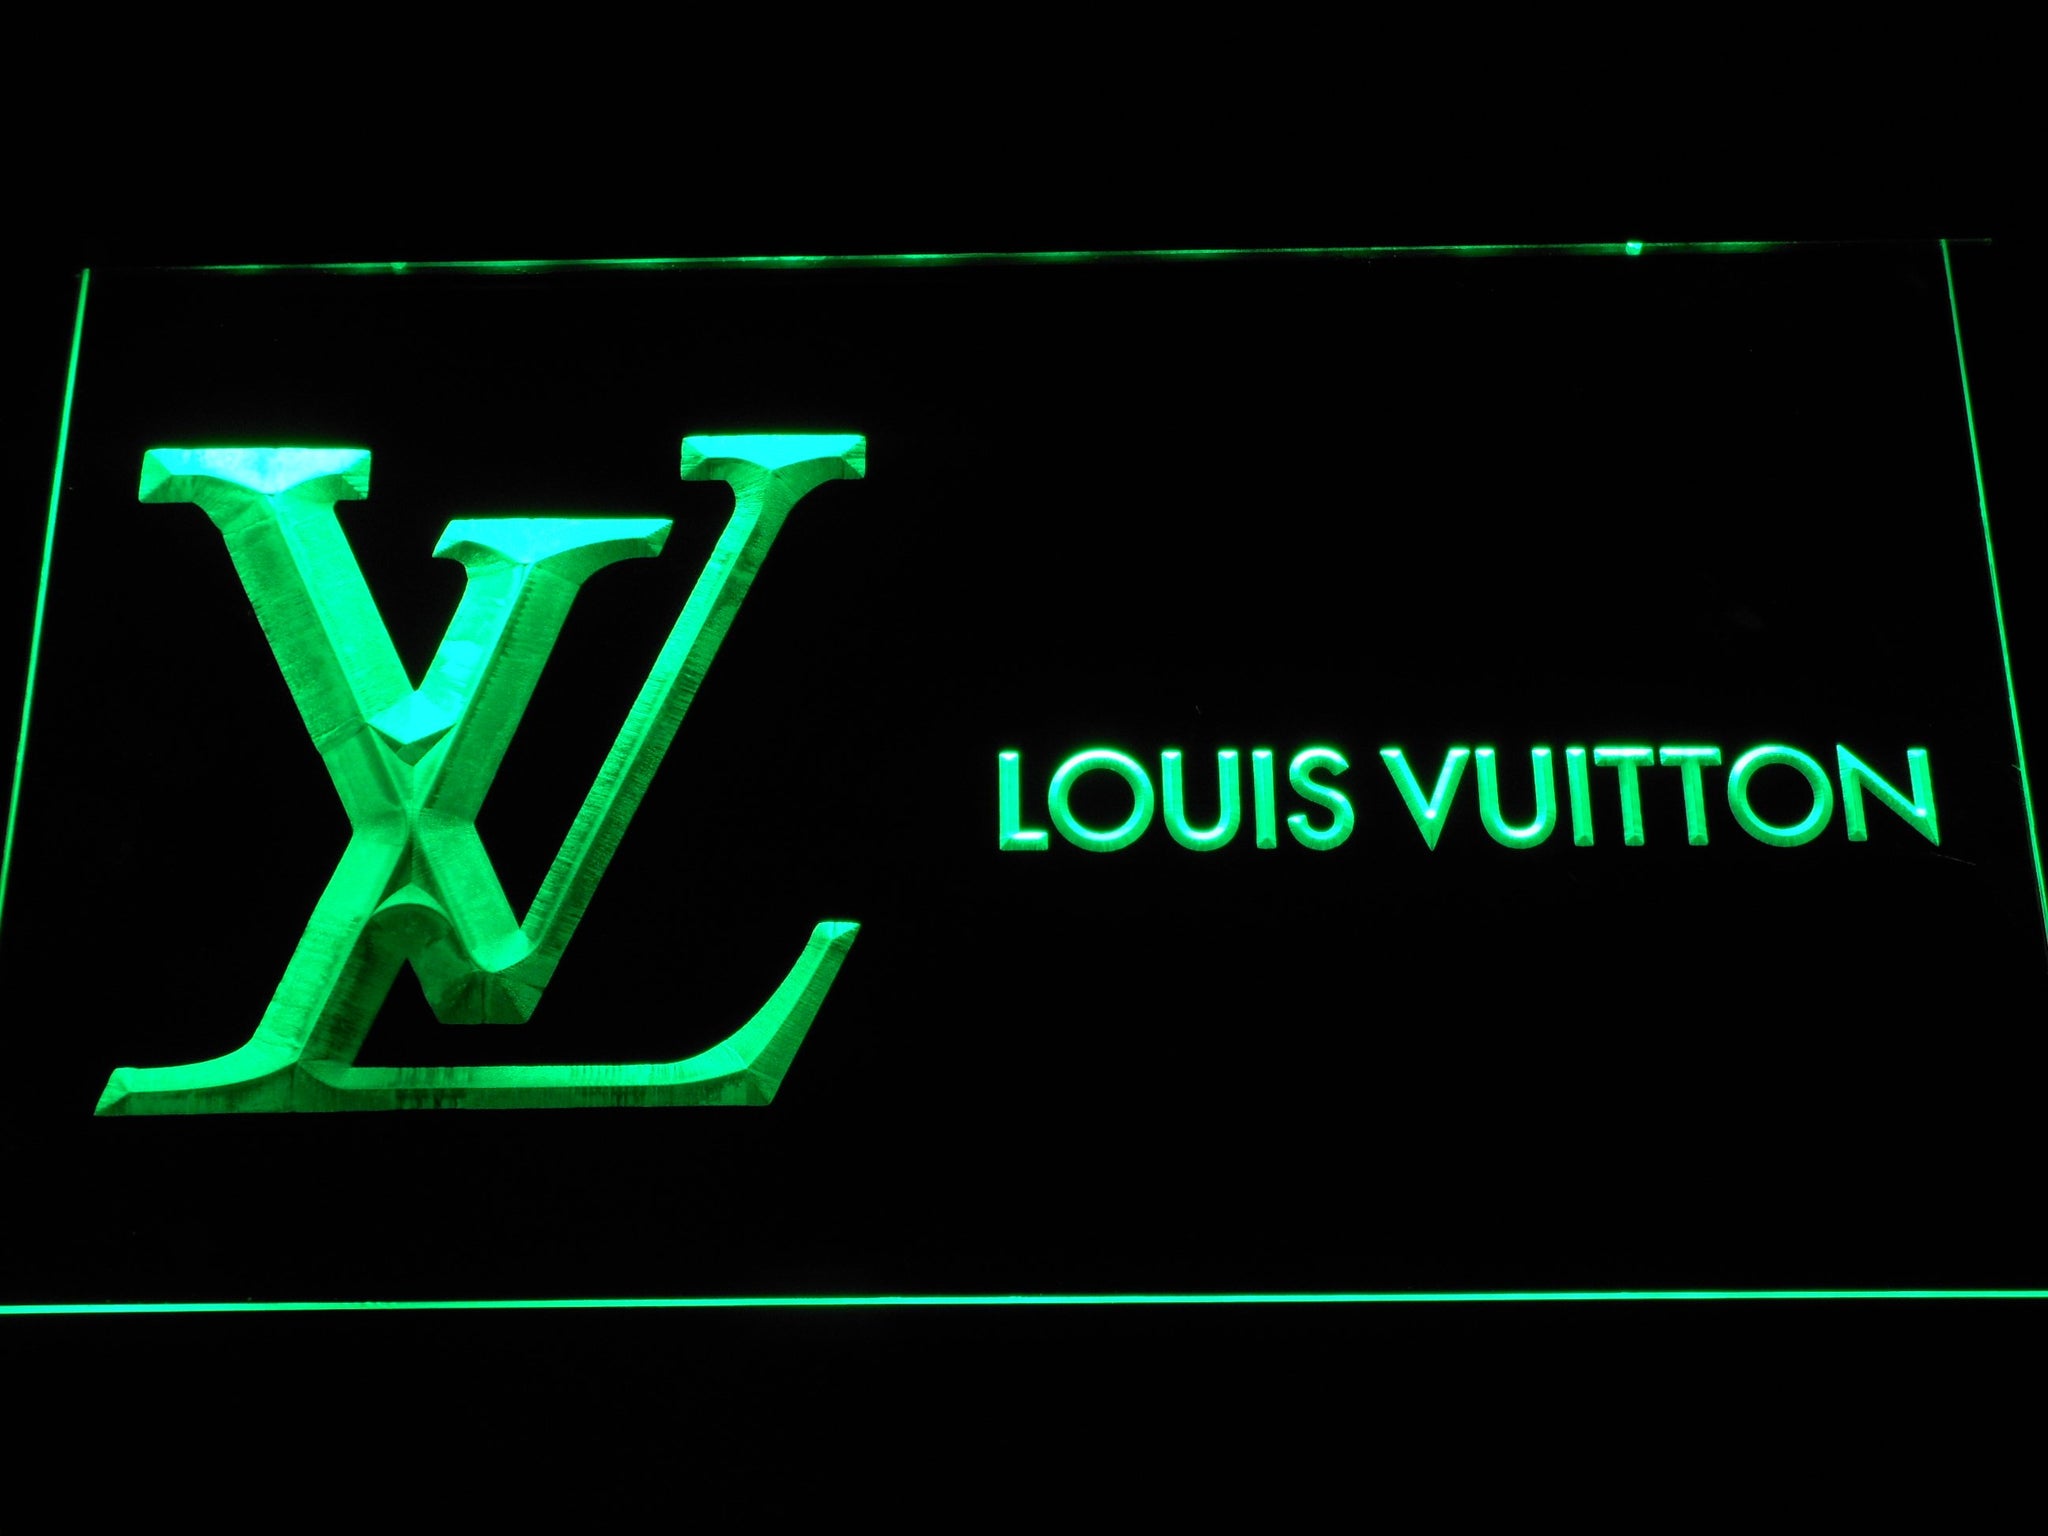 Louis Vuitton LED Neon Sign | The perfect gift for or cave